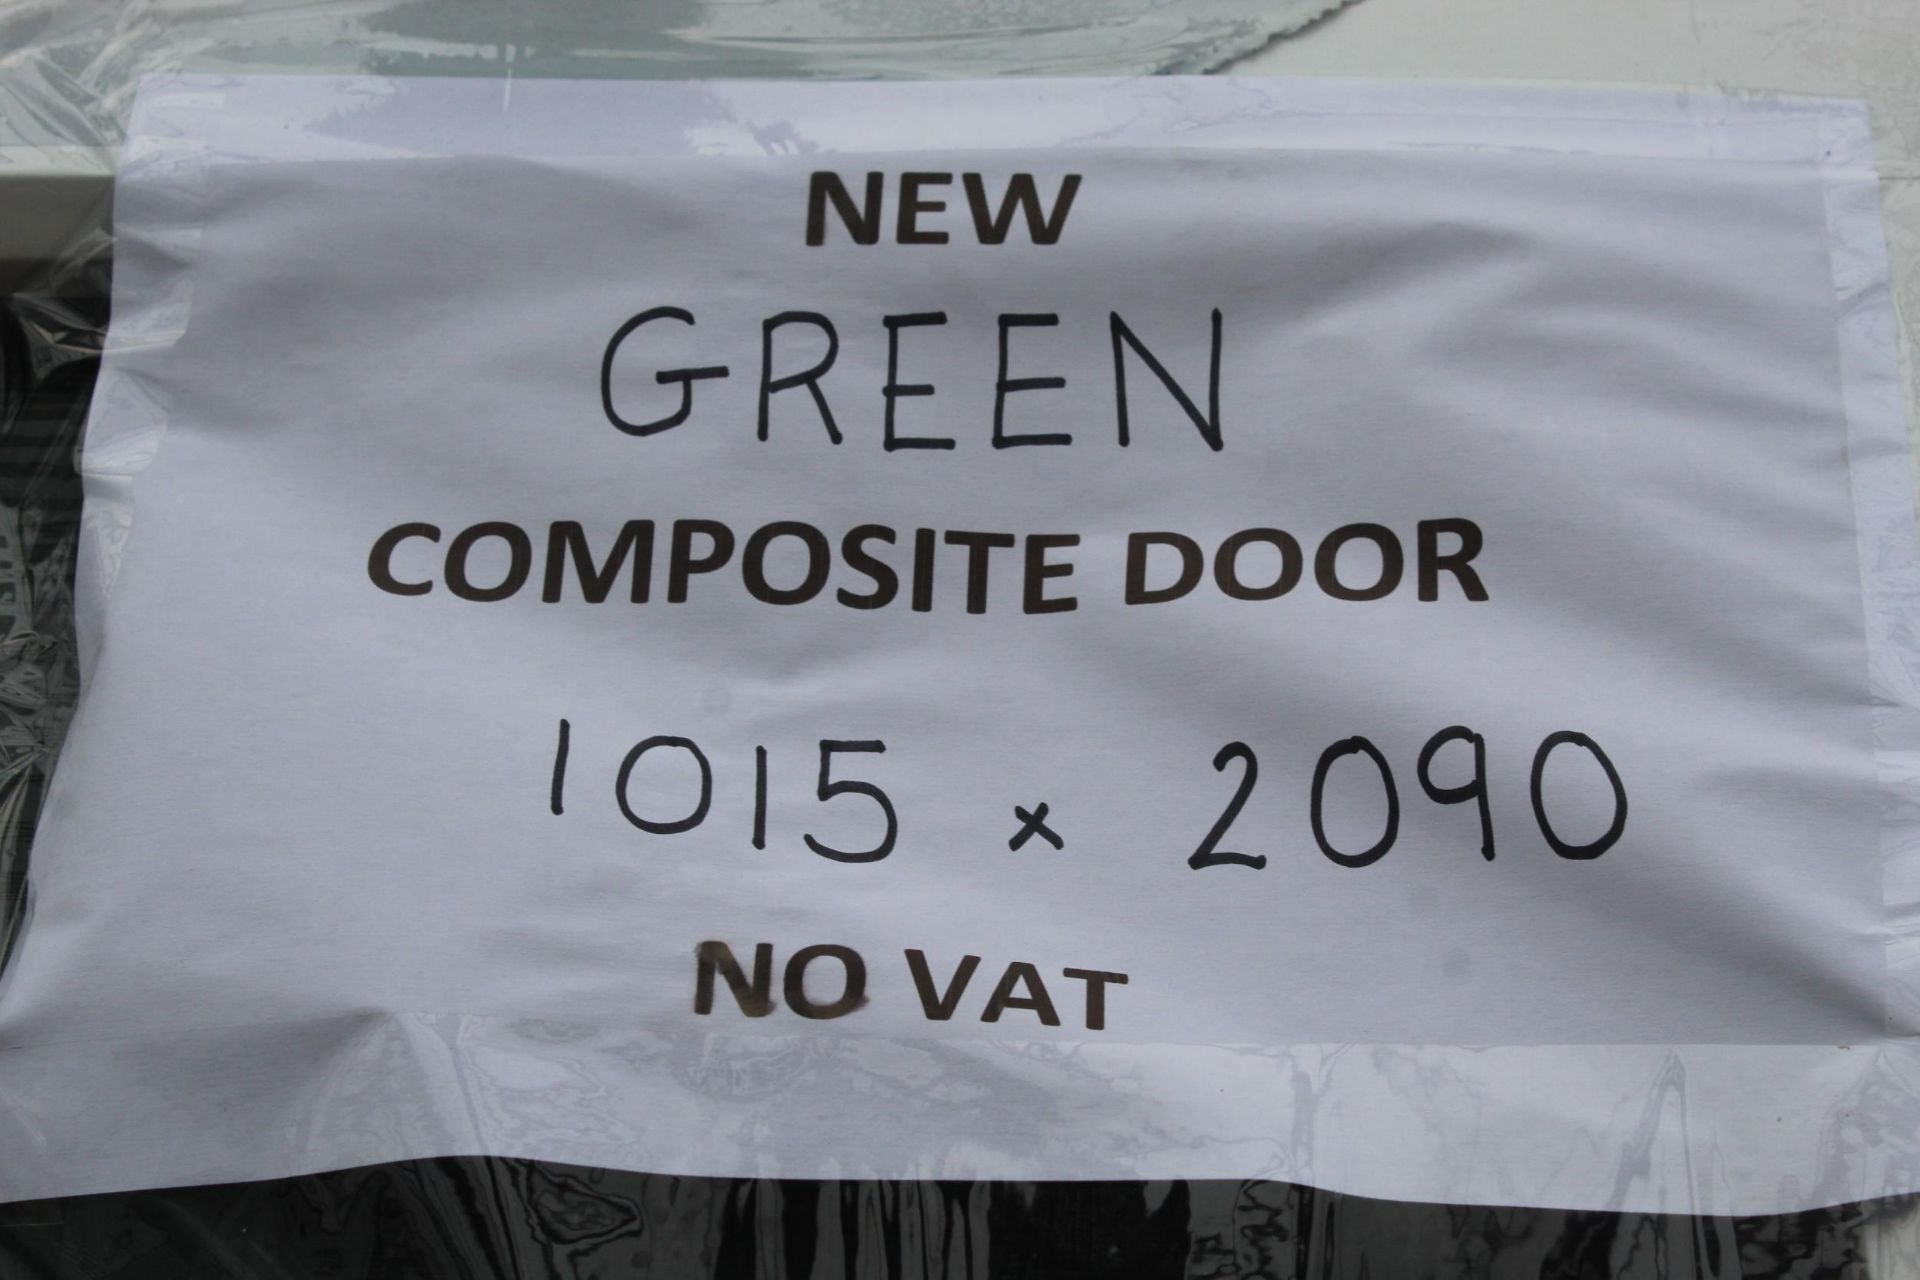 A NEW GREEN COMPOSITE DOOR AND FRAME 1015MM X 2090 MM LOCK AND KEYS IN LETTER BOX NO VAT - Bild 3 aus 3